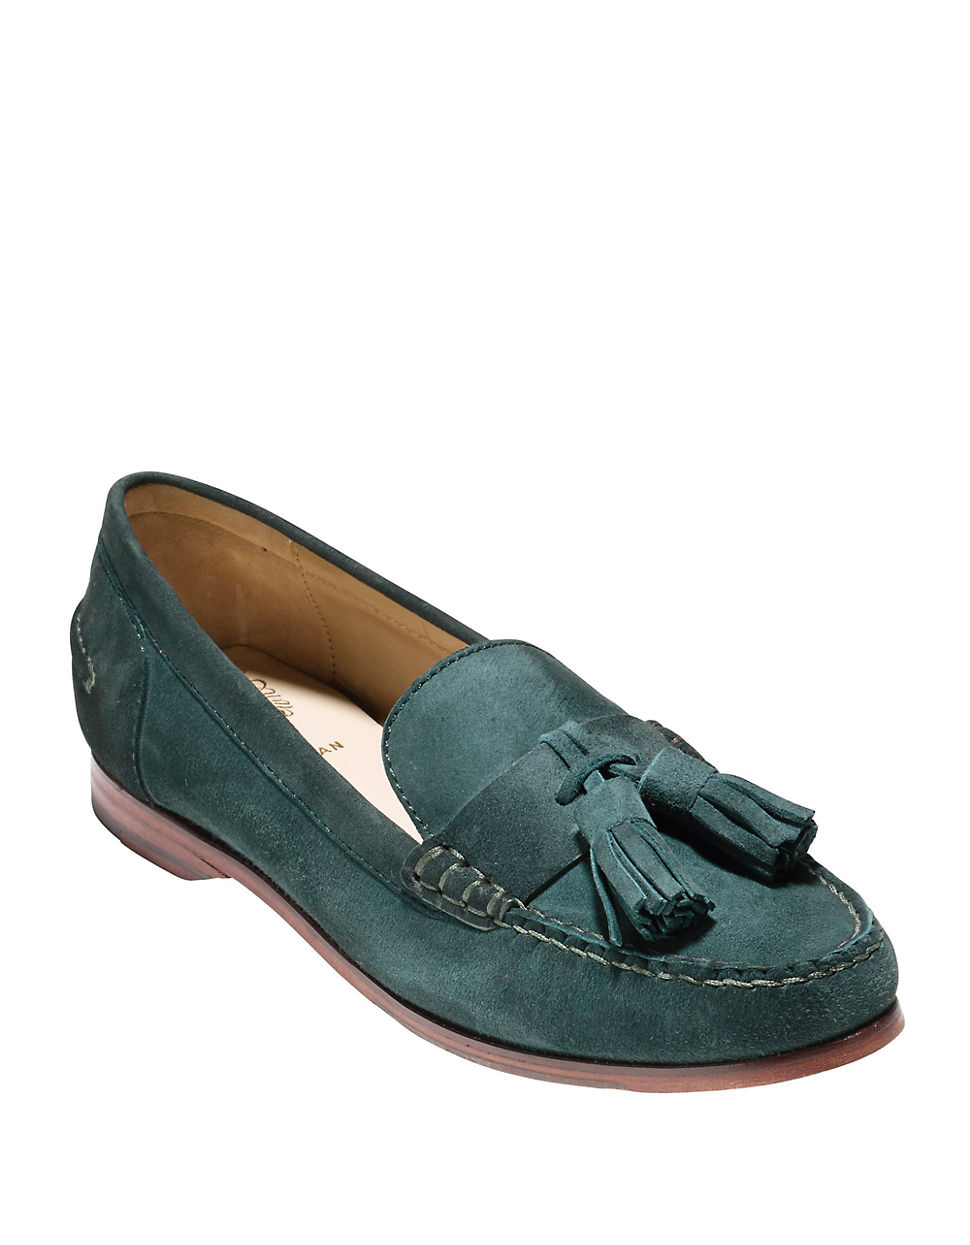 Cole Haan Pinch Grand Tassel Suede Loafers in Blue - Lyst